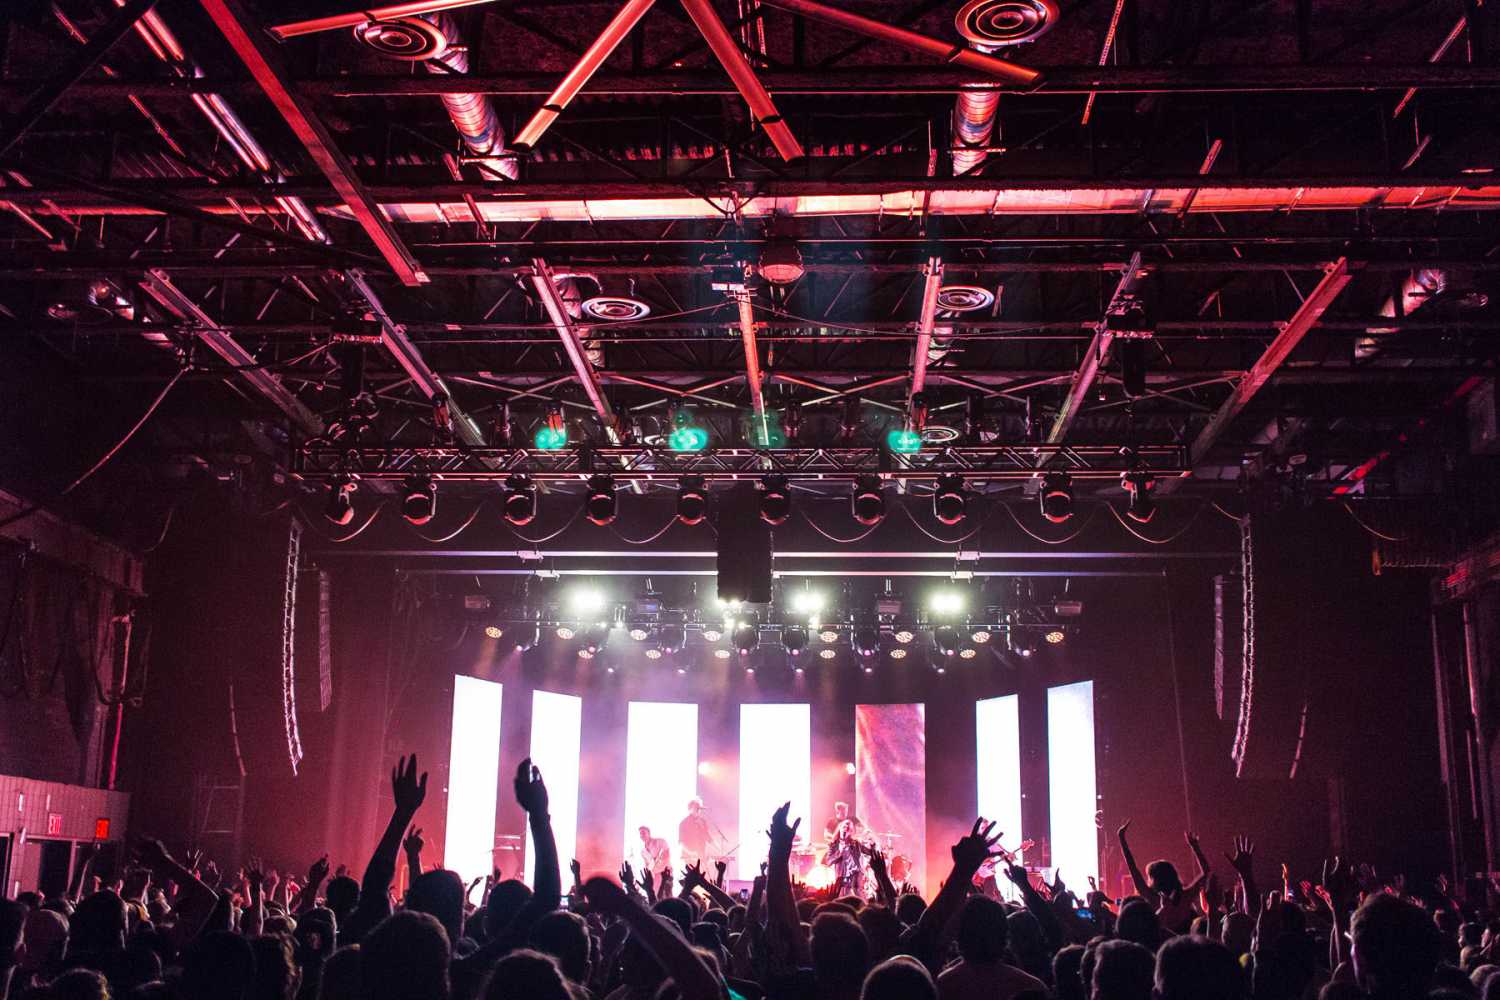 Brooklyn Steel is outfitted with L-Acoustics K2 line arrays, plus delays and stage monitors